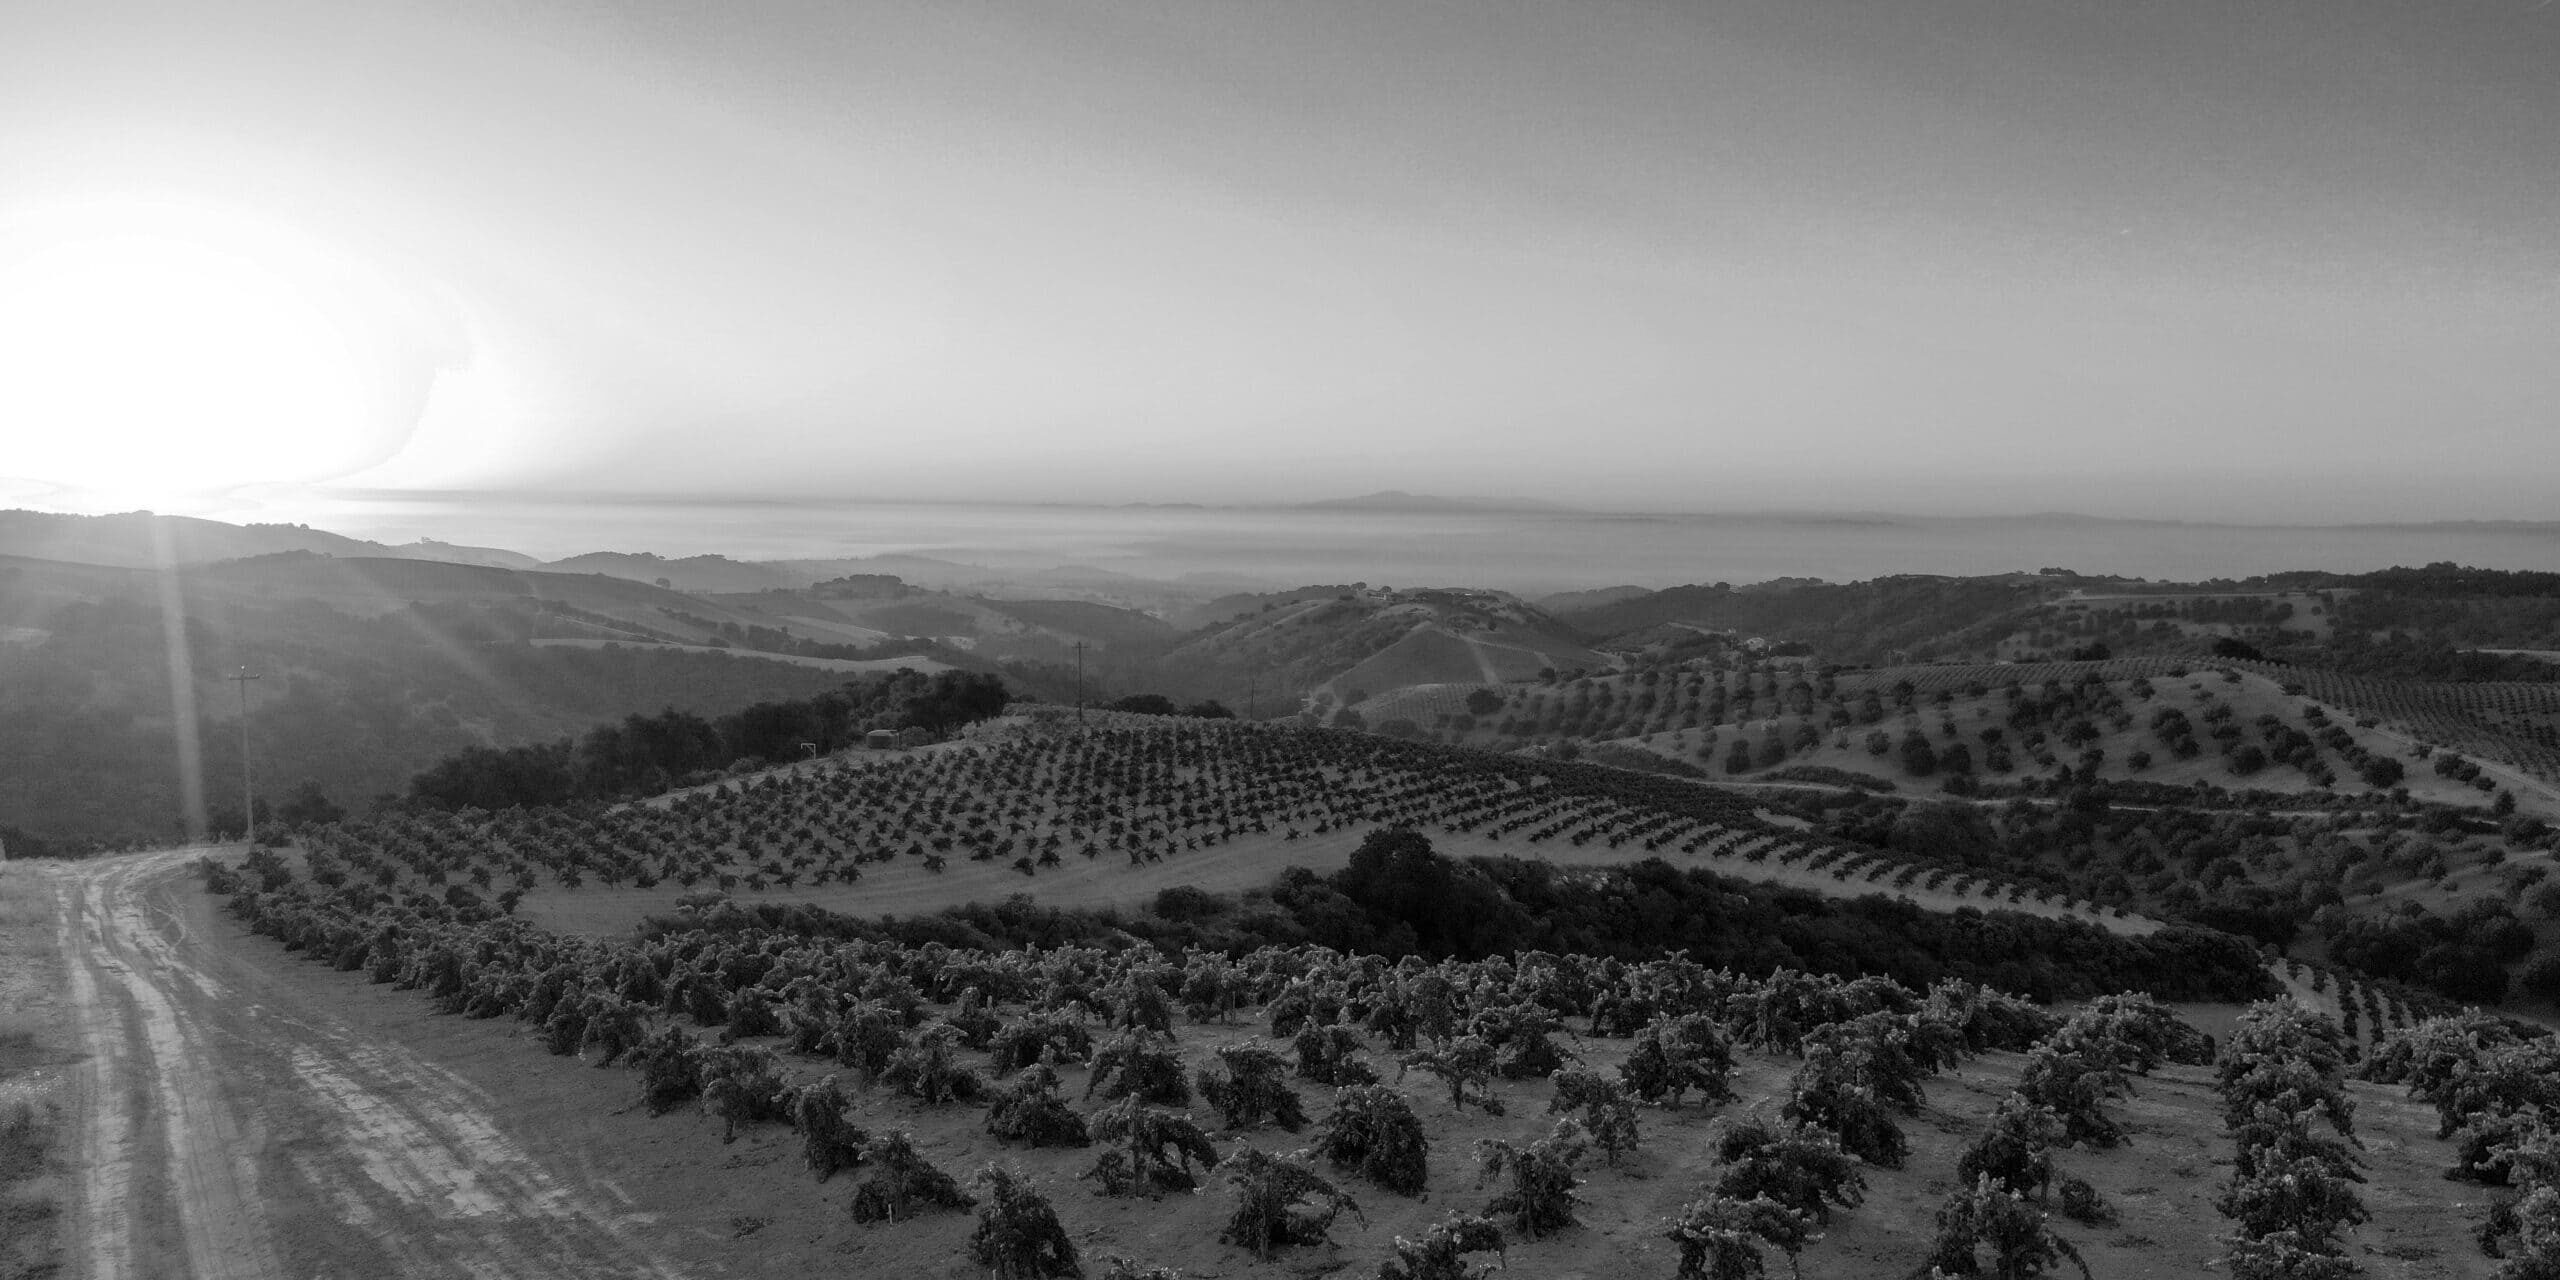 A Paso Robles wine vineyard in black and white